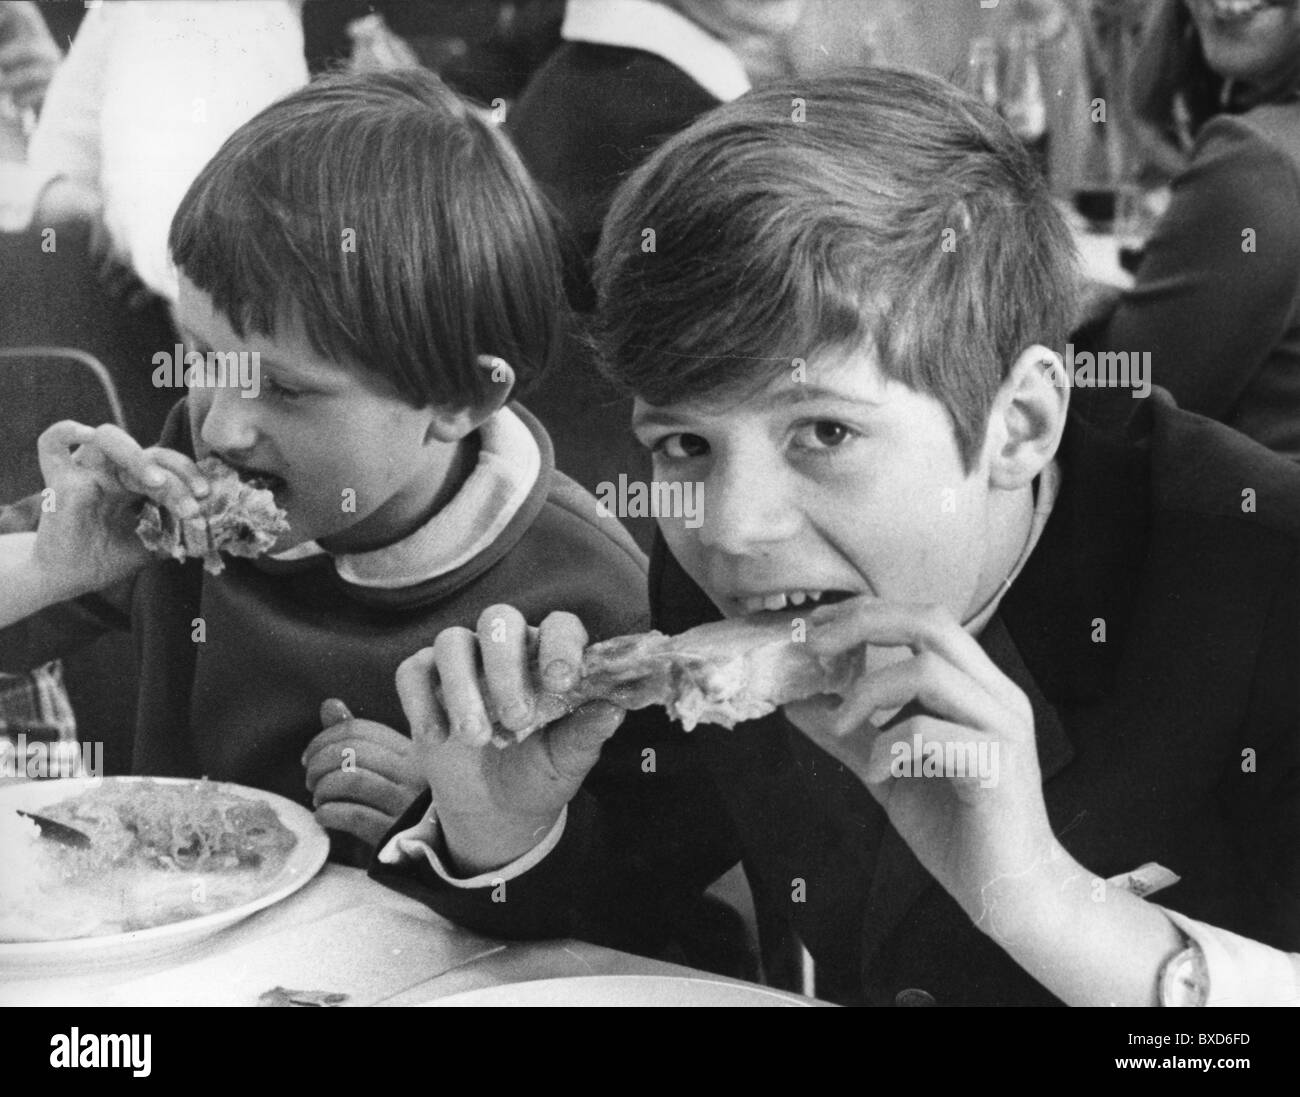 Heintje, * 12.8.1955, Dutch singer and actor, half length, meal with orphan childs, Frankfurt, Germany, 10.3.1969, Stock Photo